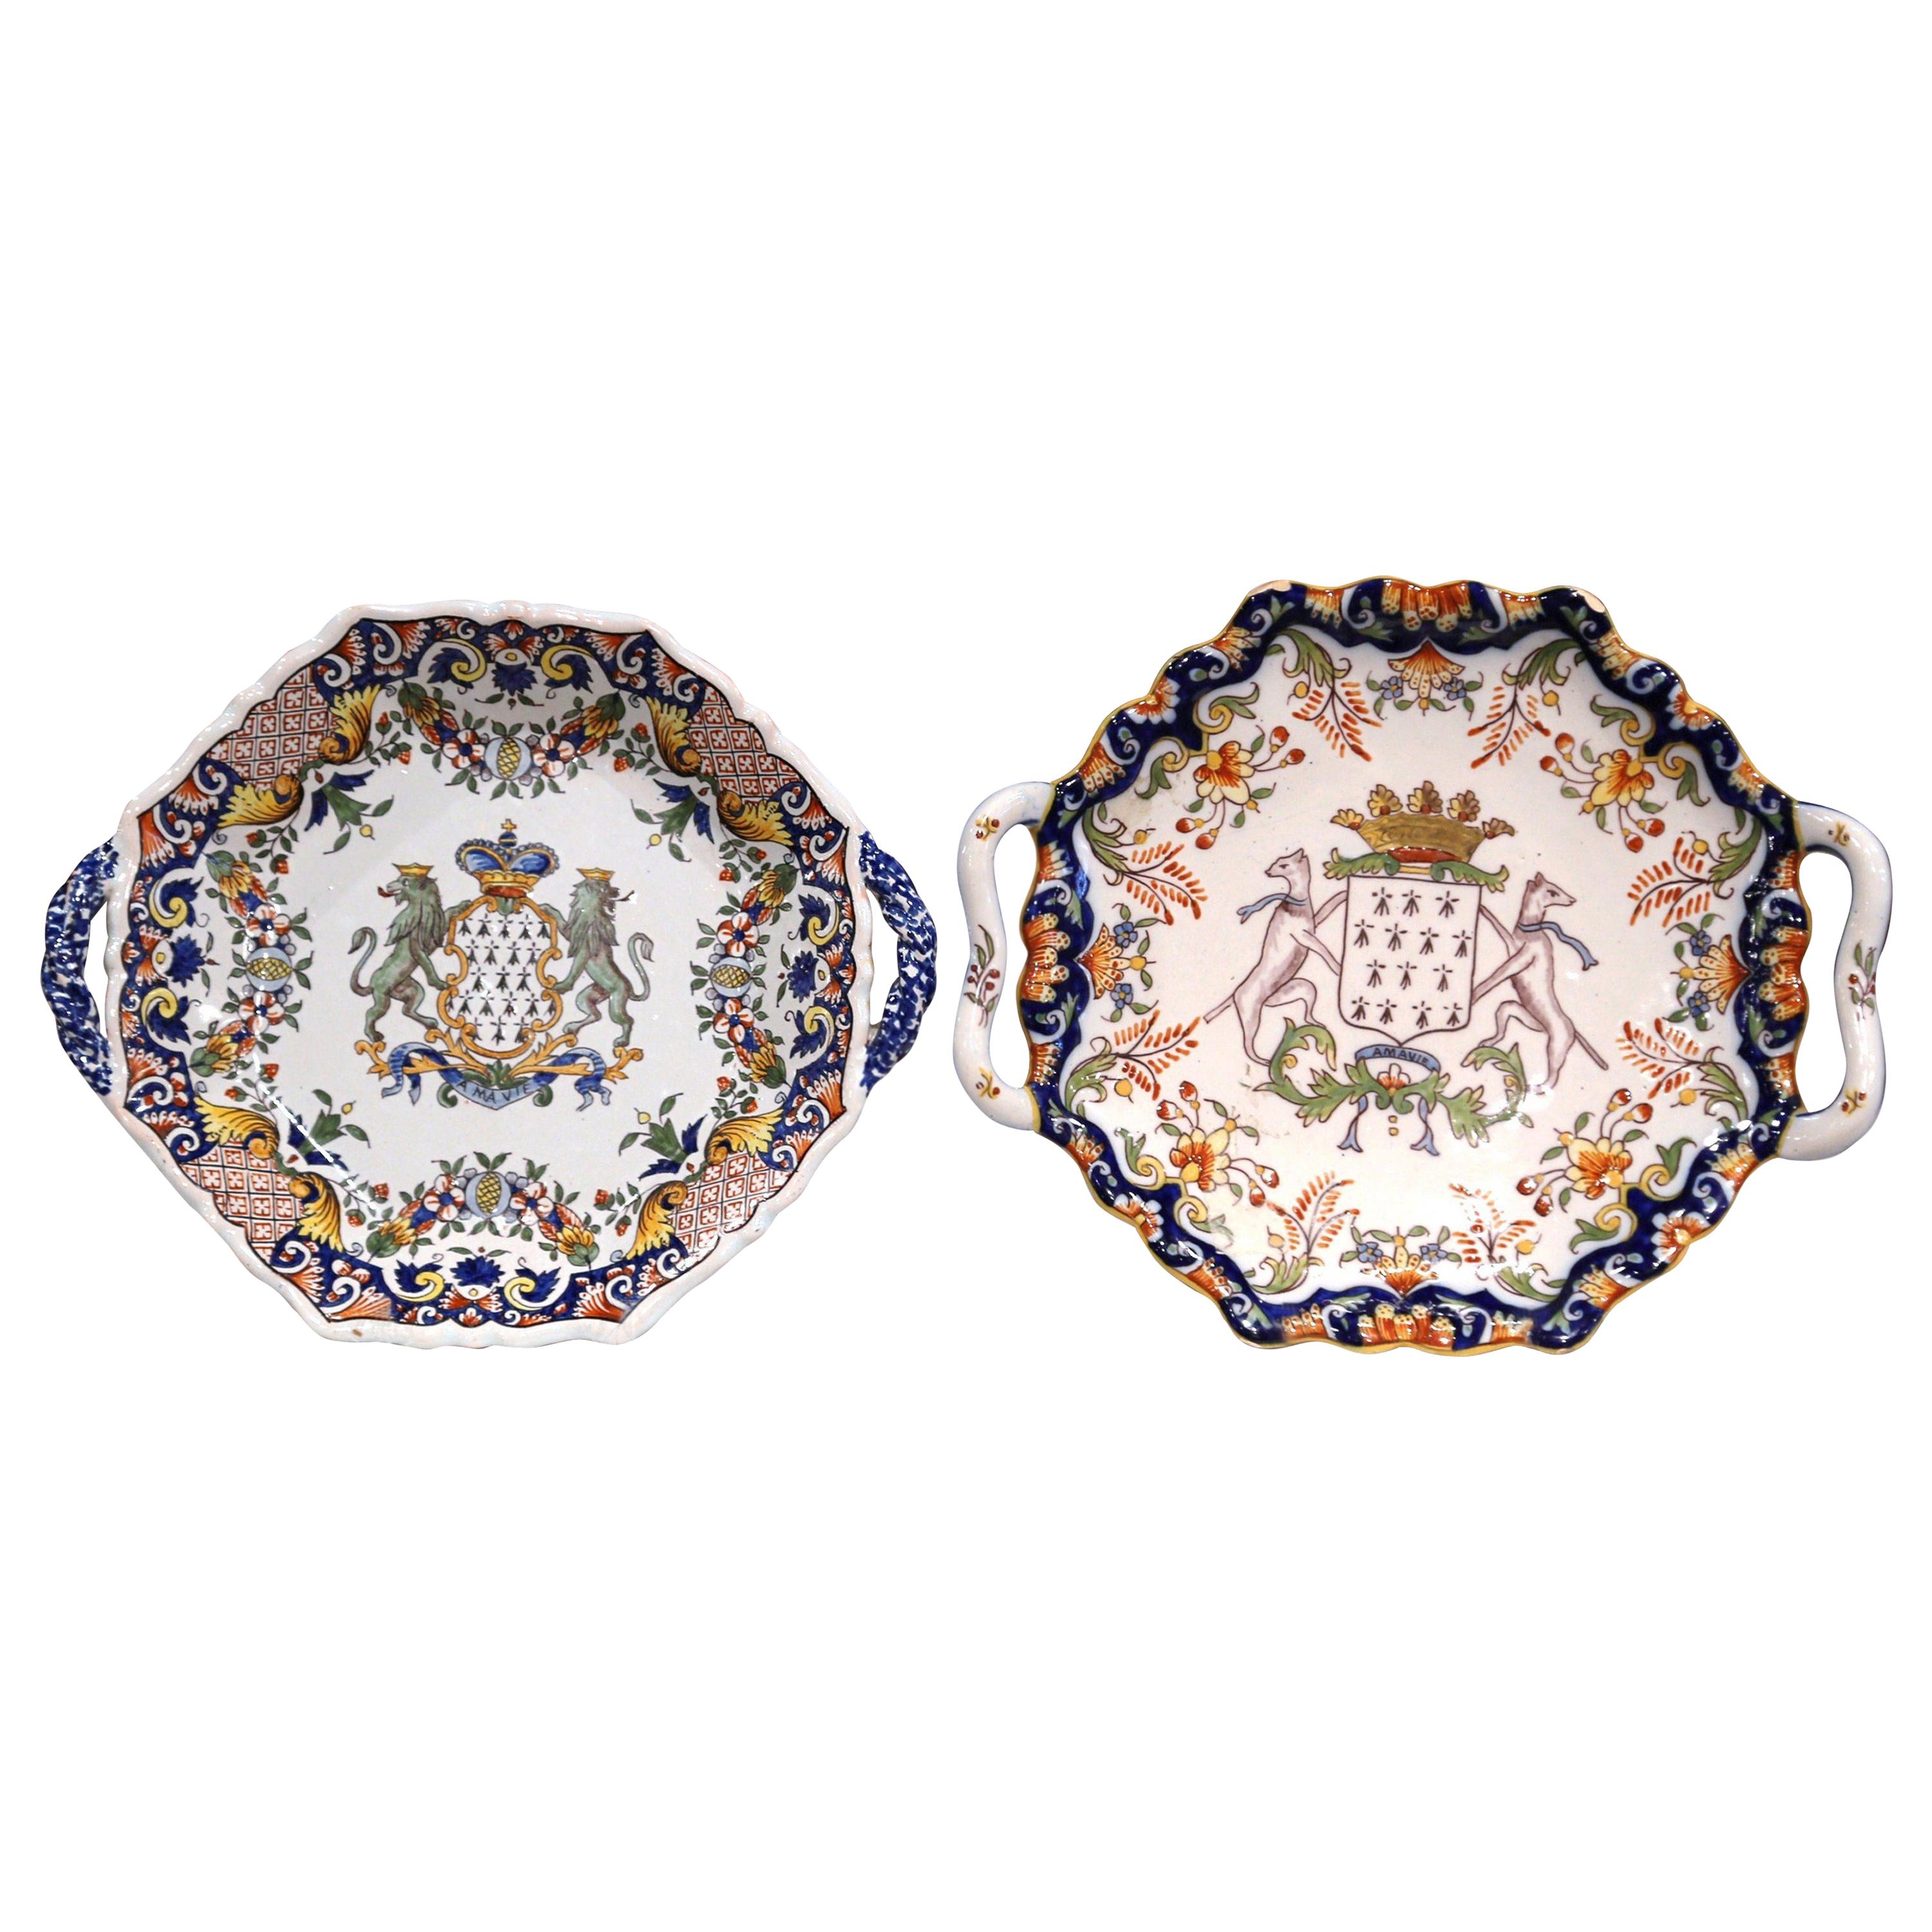 Two Mid-20th Century French Hand Painted Faience Wall Plates from Brittany